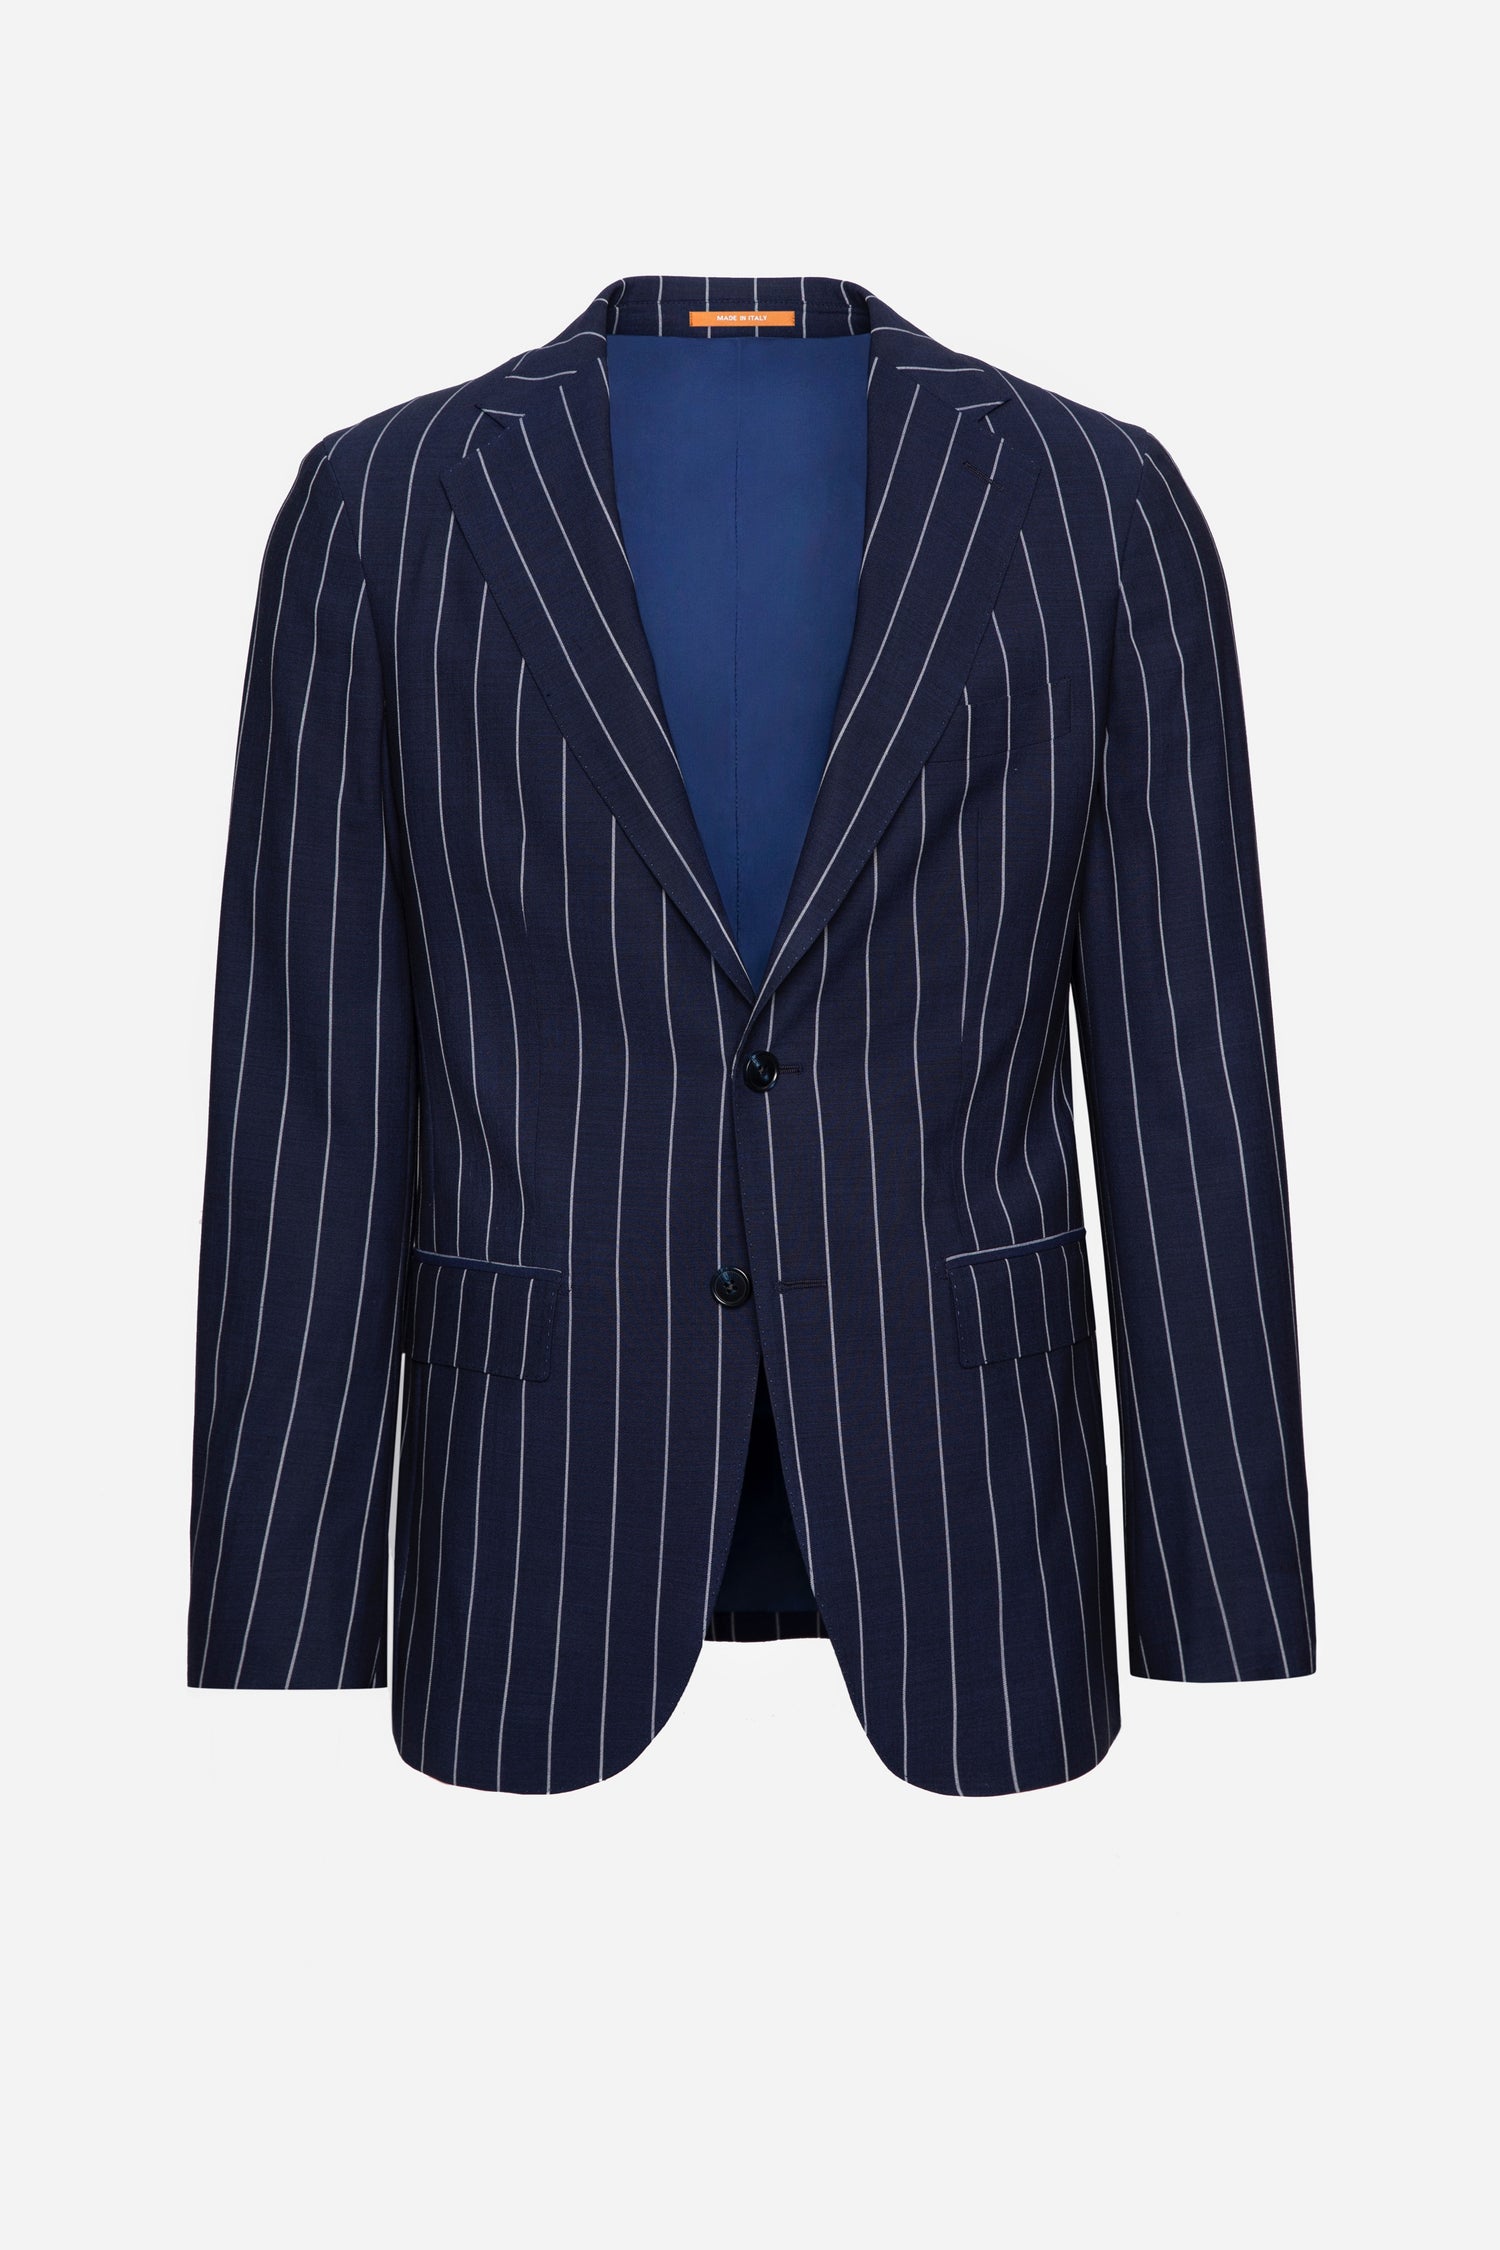 Striped Navy Ego Suit Menswear Business Suits